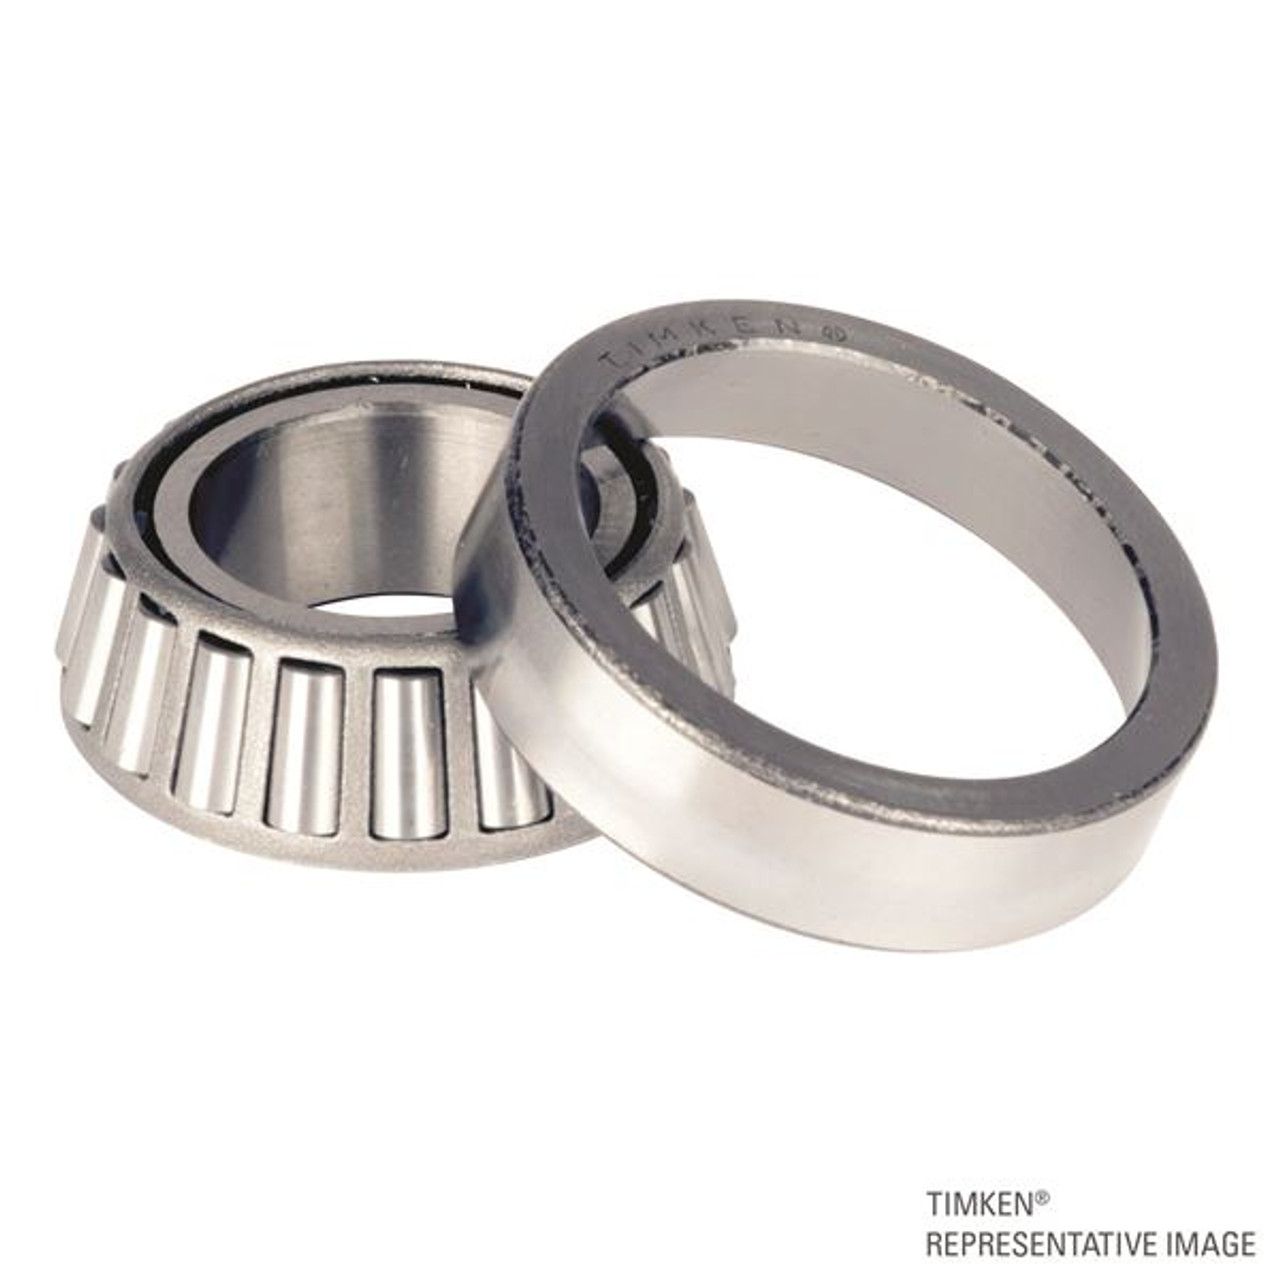 Timken® Single Row Cup & Cone Assembly - Precision Class  3659-90010